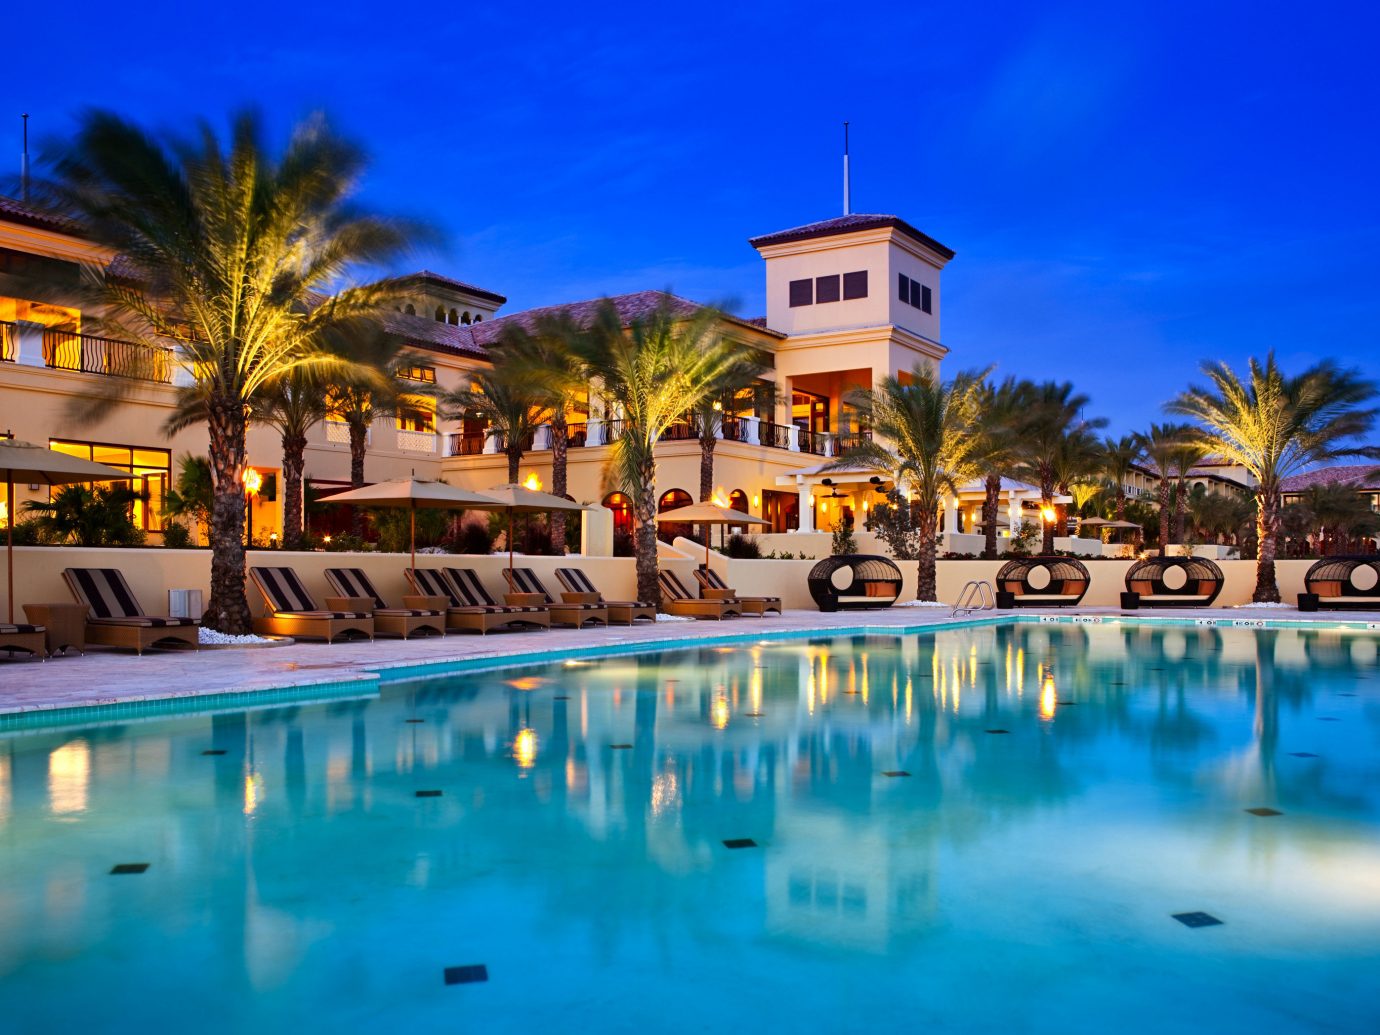 All-Inclusive Resorts Hotels Trip Ideas sky outdoor Resort water leisure reflection swimming pool resort town palm tree arecales vacation hotel real estate estate tourism evening tropics Harbor Villa home caribbean tree computer wallpaper lined